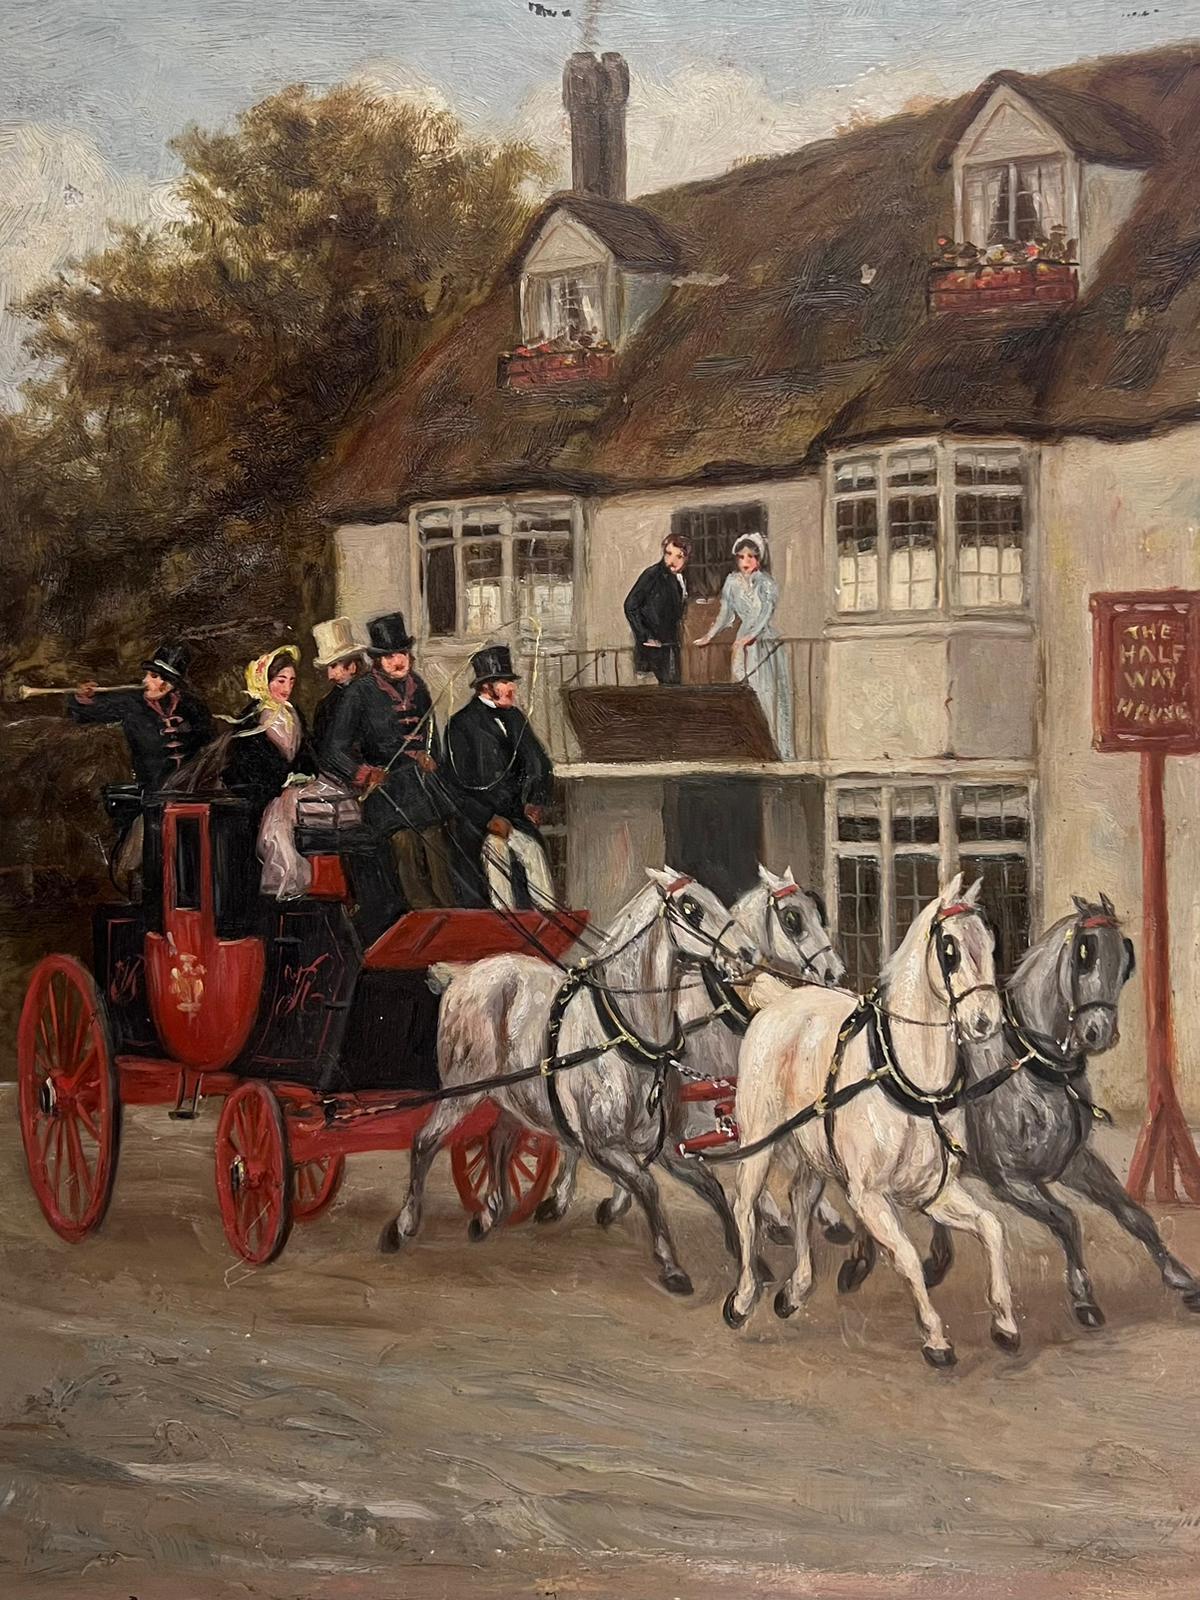 The Half Way Hotel
English artist, late 19th century
(double sided painting with a hunting scene to the reverse). 
oil painting on board, unframed
board: 13 x 10.75 inches
provenance: private collection, Surrey, England
condition: good and sound